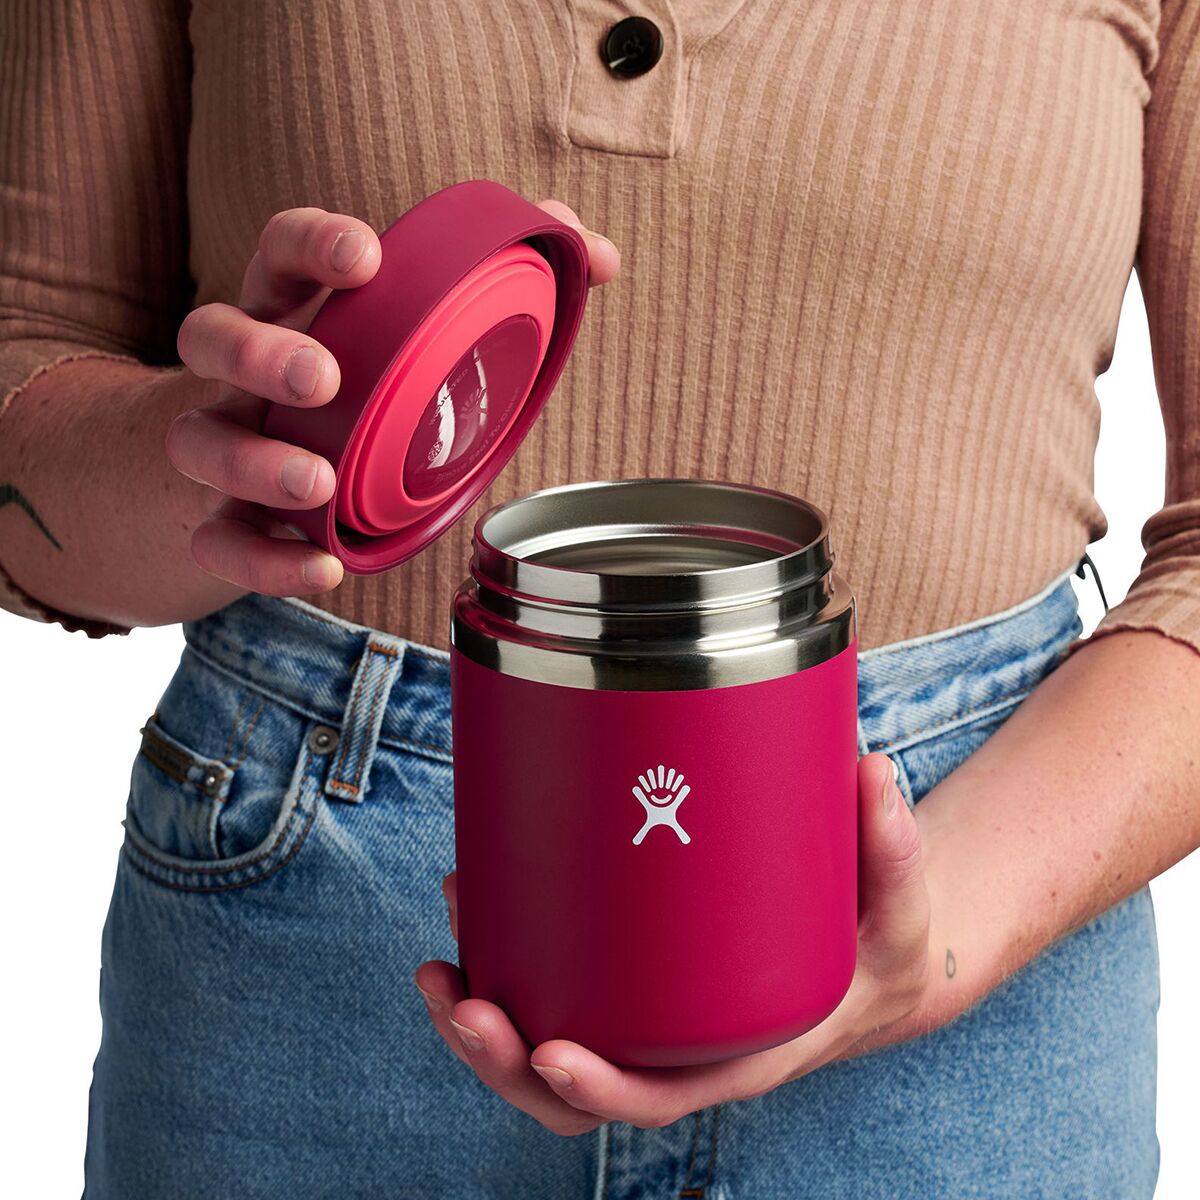 has a Hydro Flask insulated food jar for 28% off right now